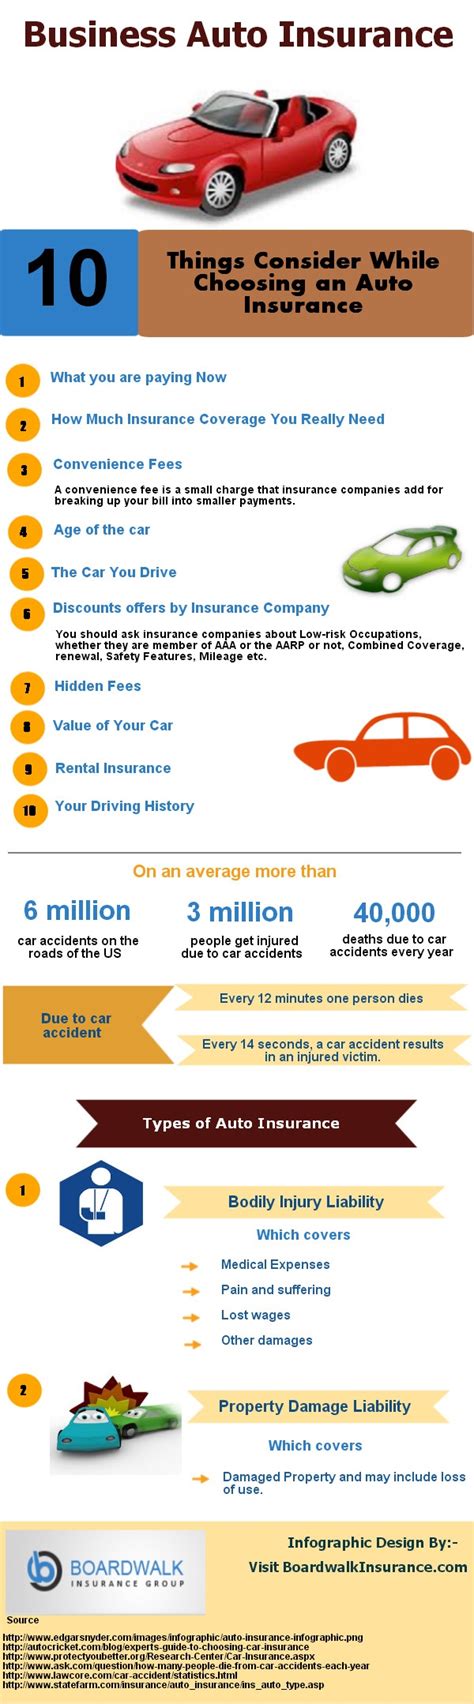 After all, the best property insurance policies construction business owners who want to optimize construction site safety and limit liability need auto insurance. Top 10 Auto Insurance Infographics